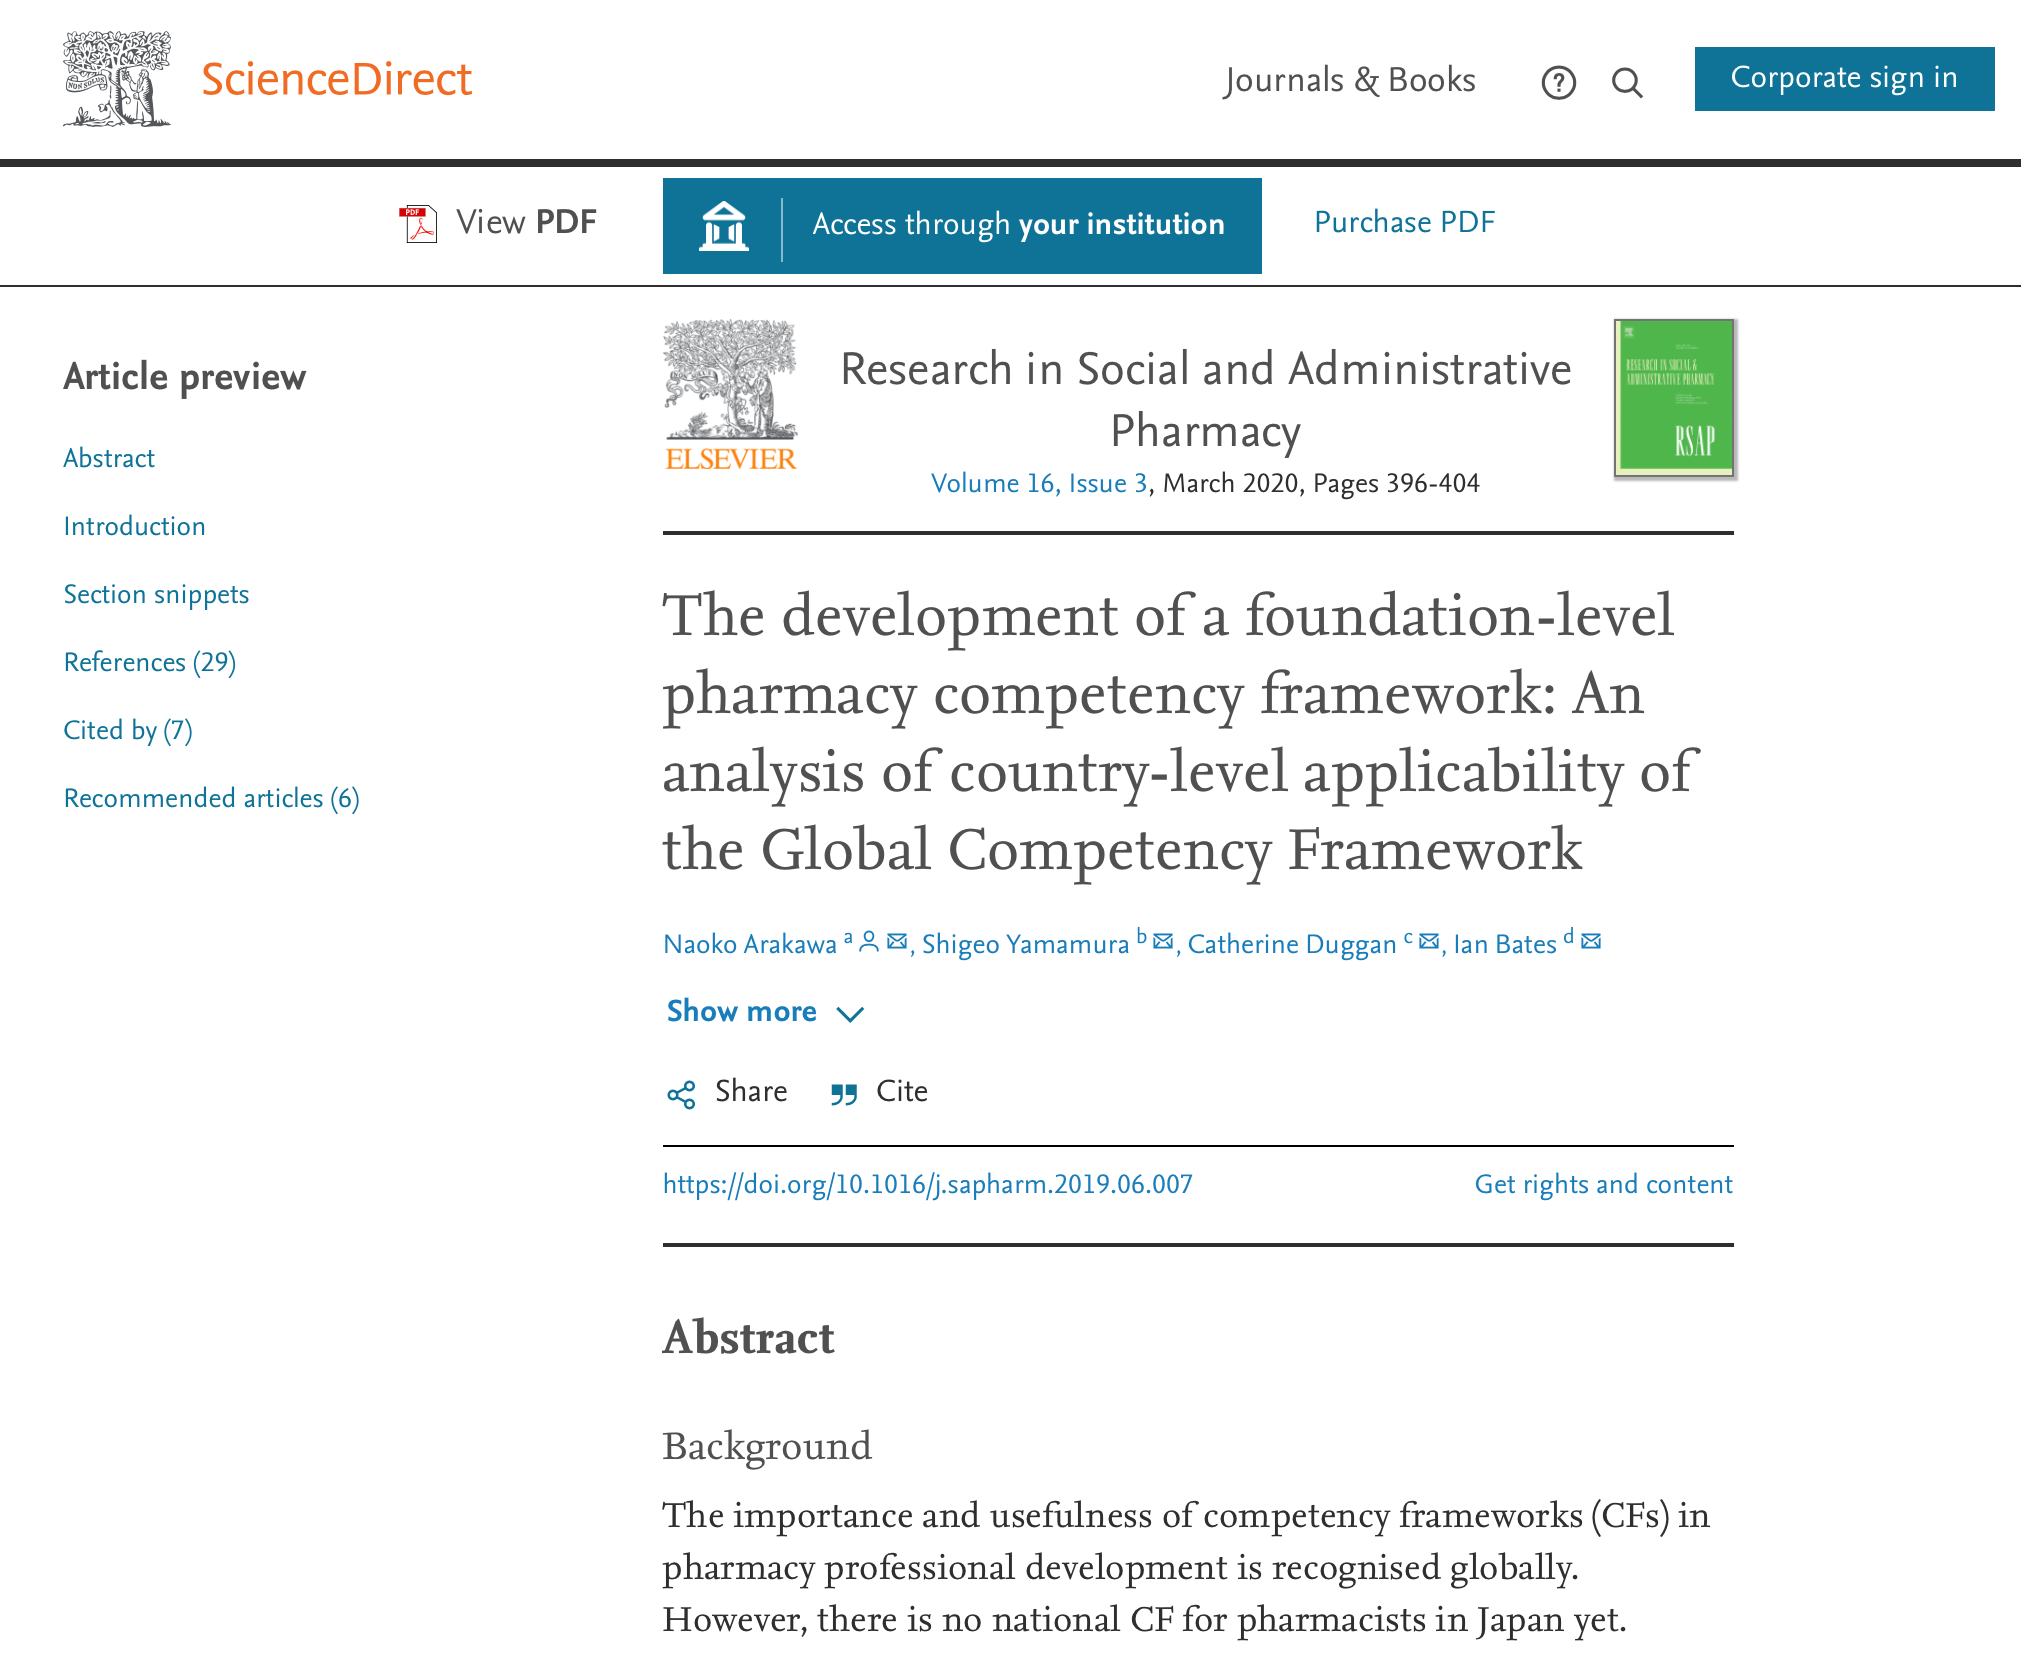 The development of a foundation-level pharmacy competency framework: An analysis of country-level applicability of the Global Competency Framework (2020) Thumbnail